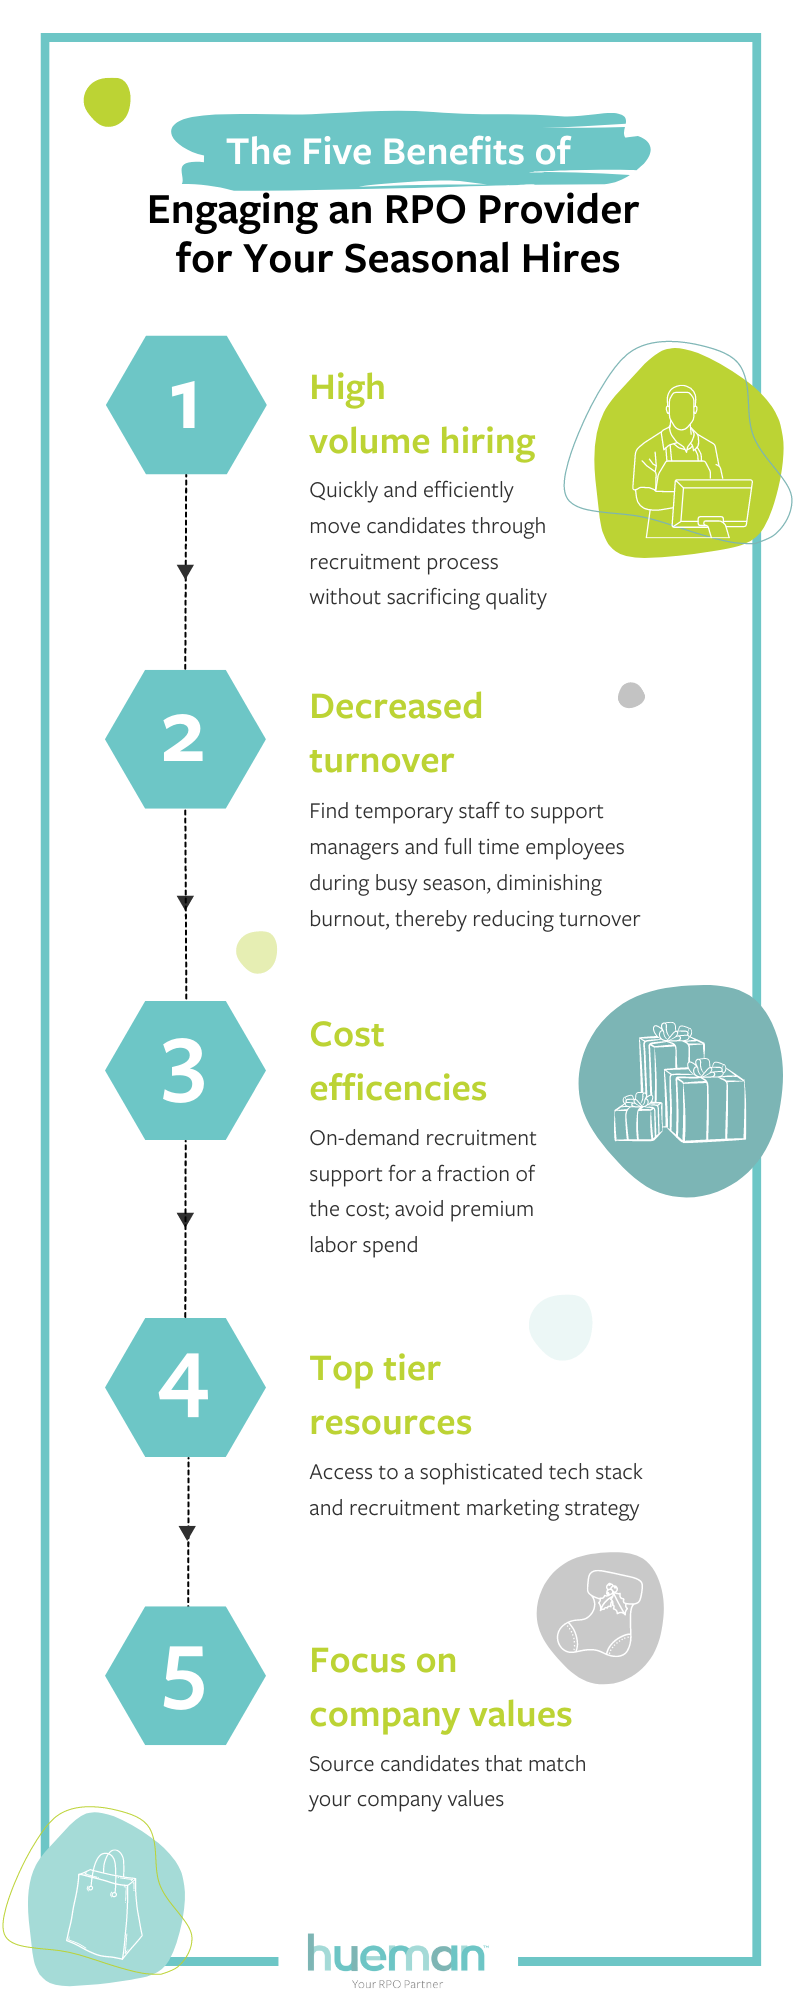 Infographic highlighting the 5 key benefits of partnering with an RPO for hiring seasonal workers